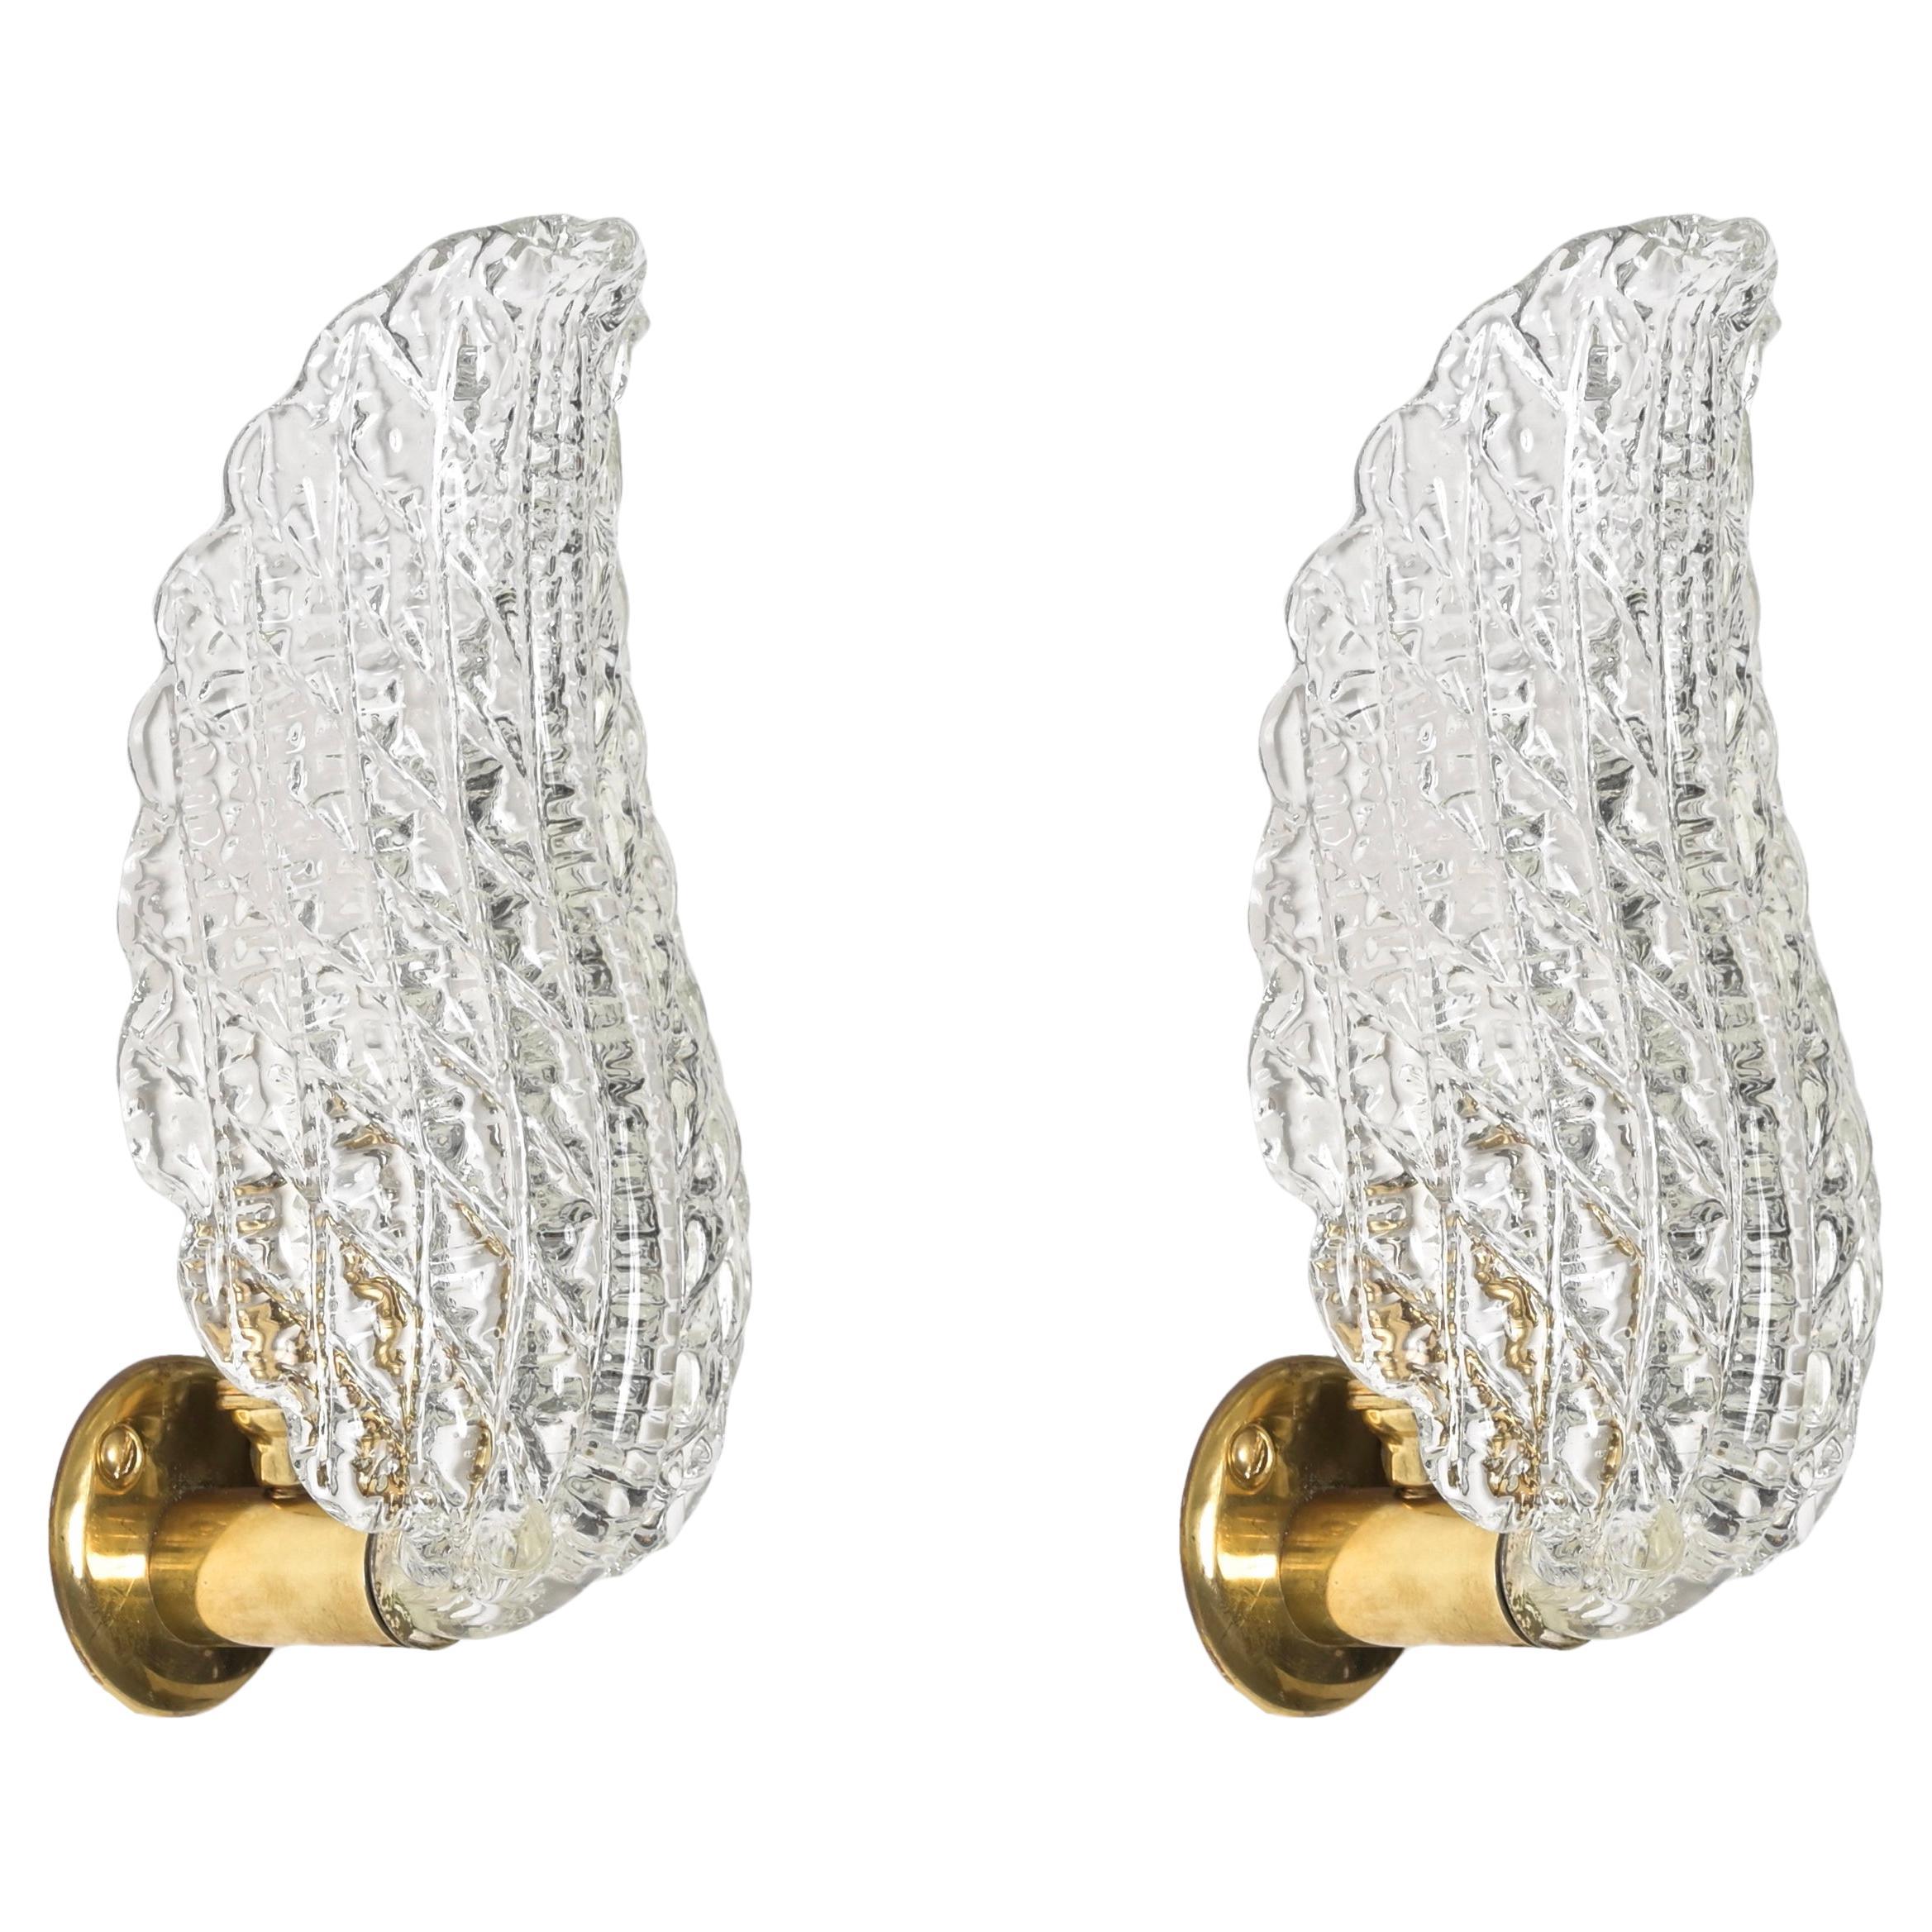 Pair of Midcentury Murano Glass and Brass Leaf Sconces, by Barovier, Italy 1950s For Sale